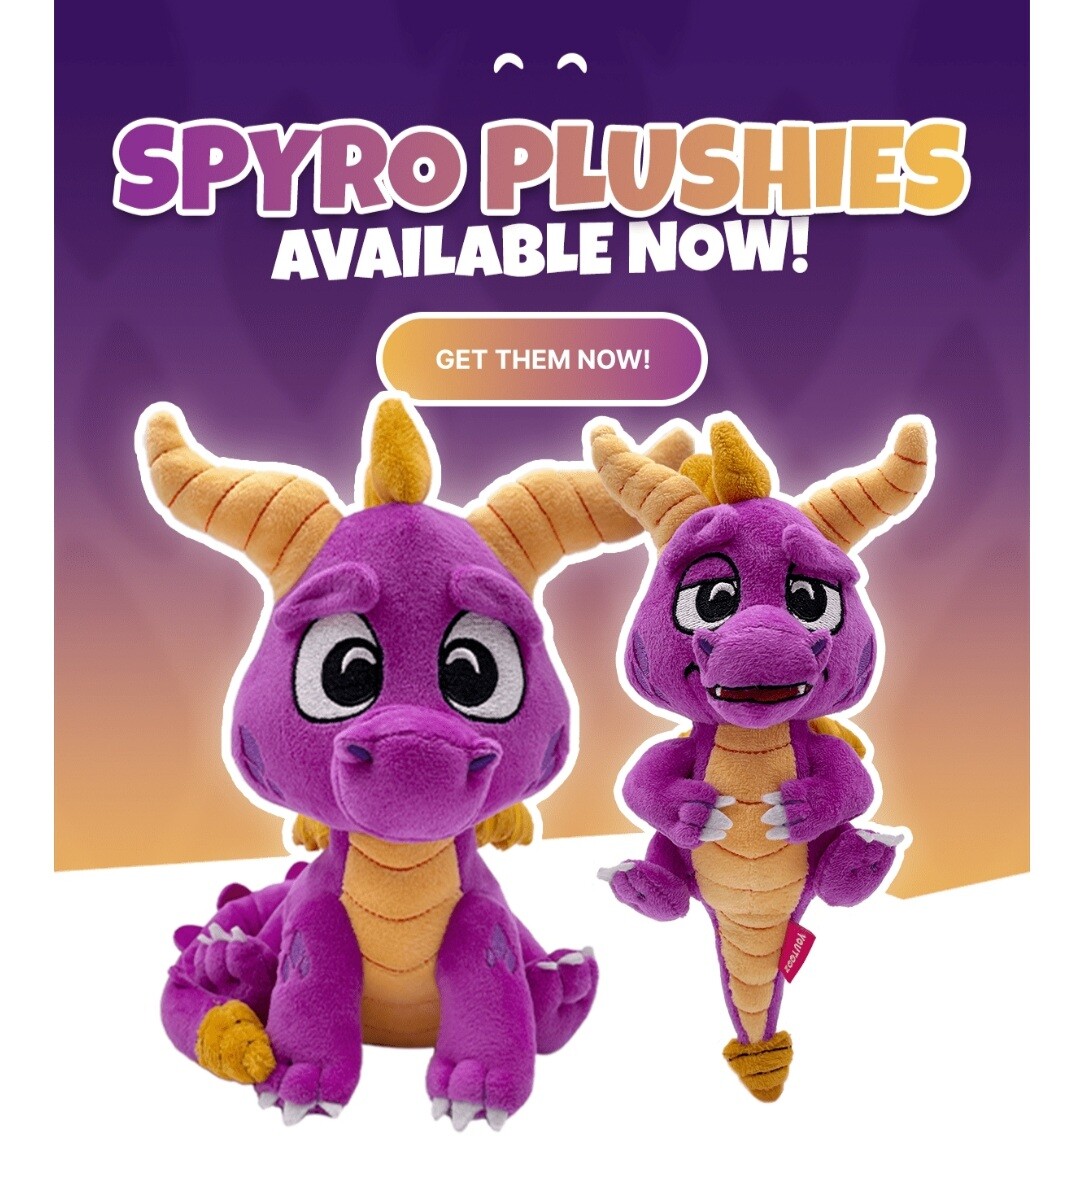 Two Spyro plushies from YouTooz. Both have big jowls, presumably meant to be cute baby cheeks but looking more like bee sting inflammation. One of the plushies is meant to look 'chilled', with half-lidded eyes and a relaxed mouth, but he looks more as though he's trying not to vom. 